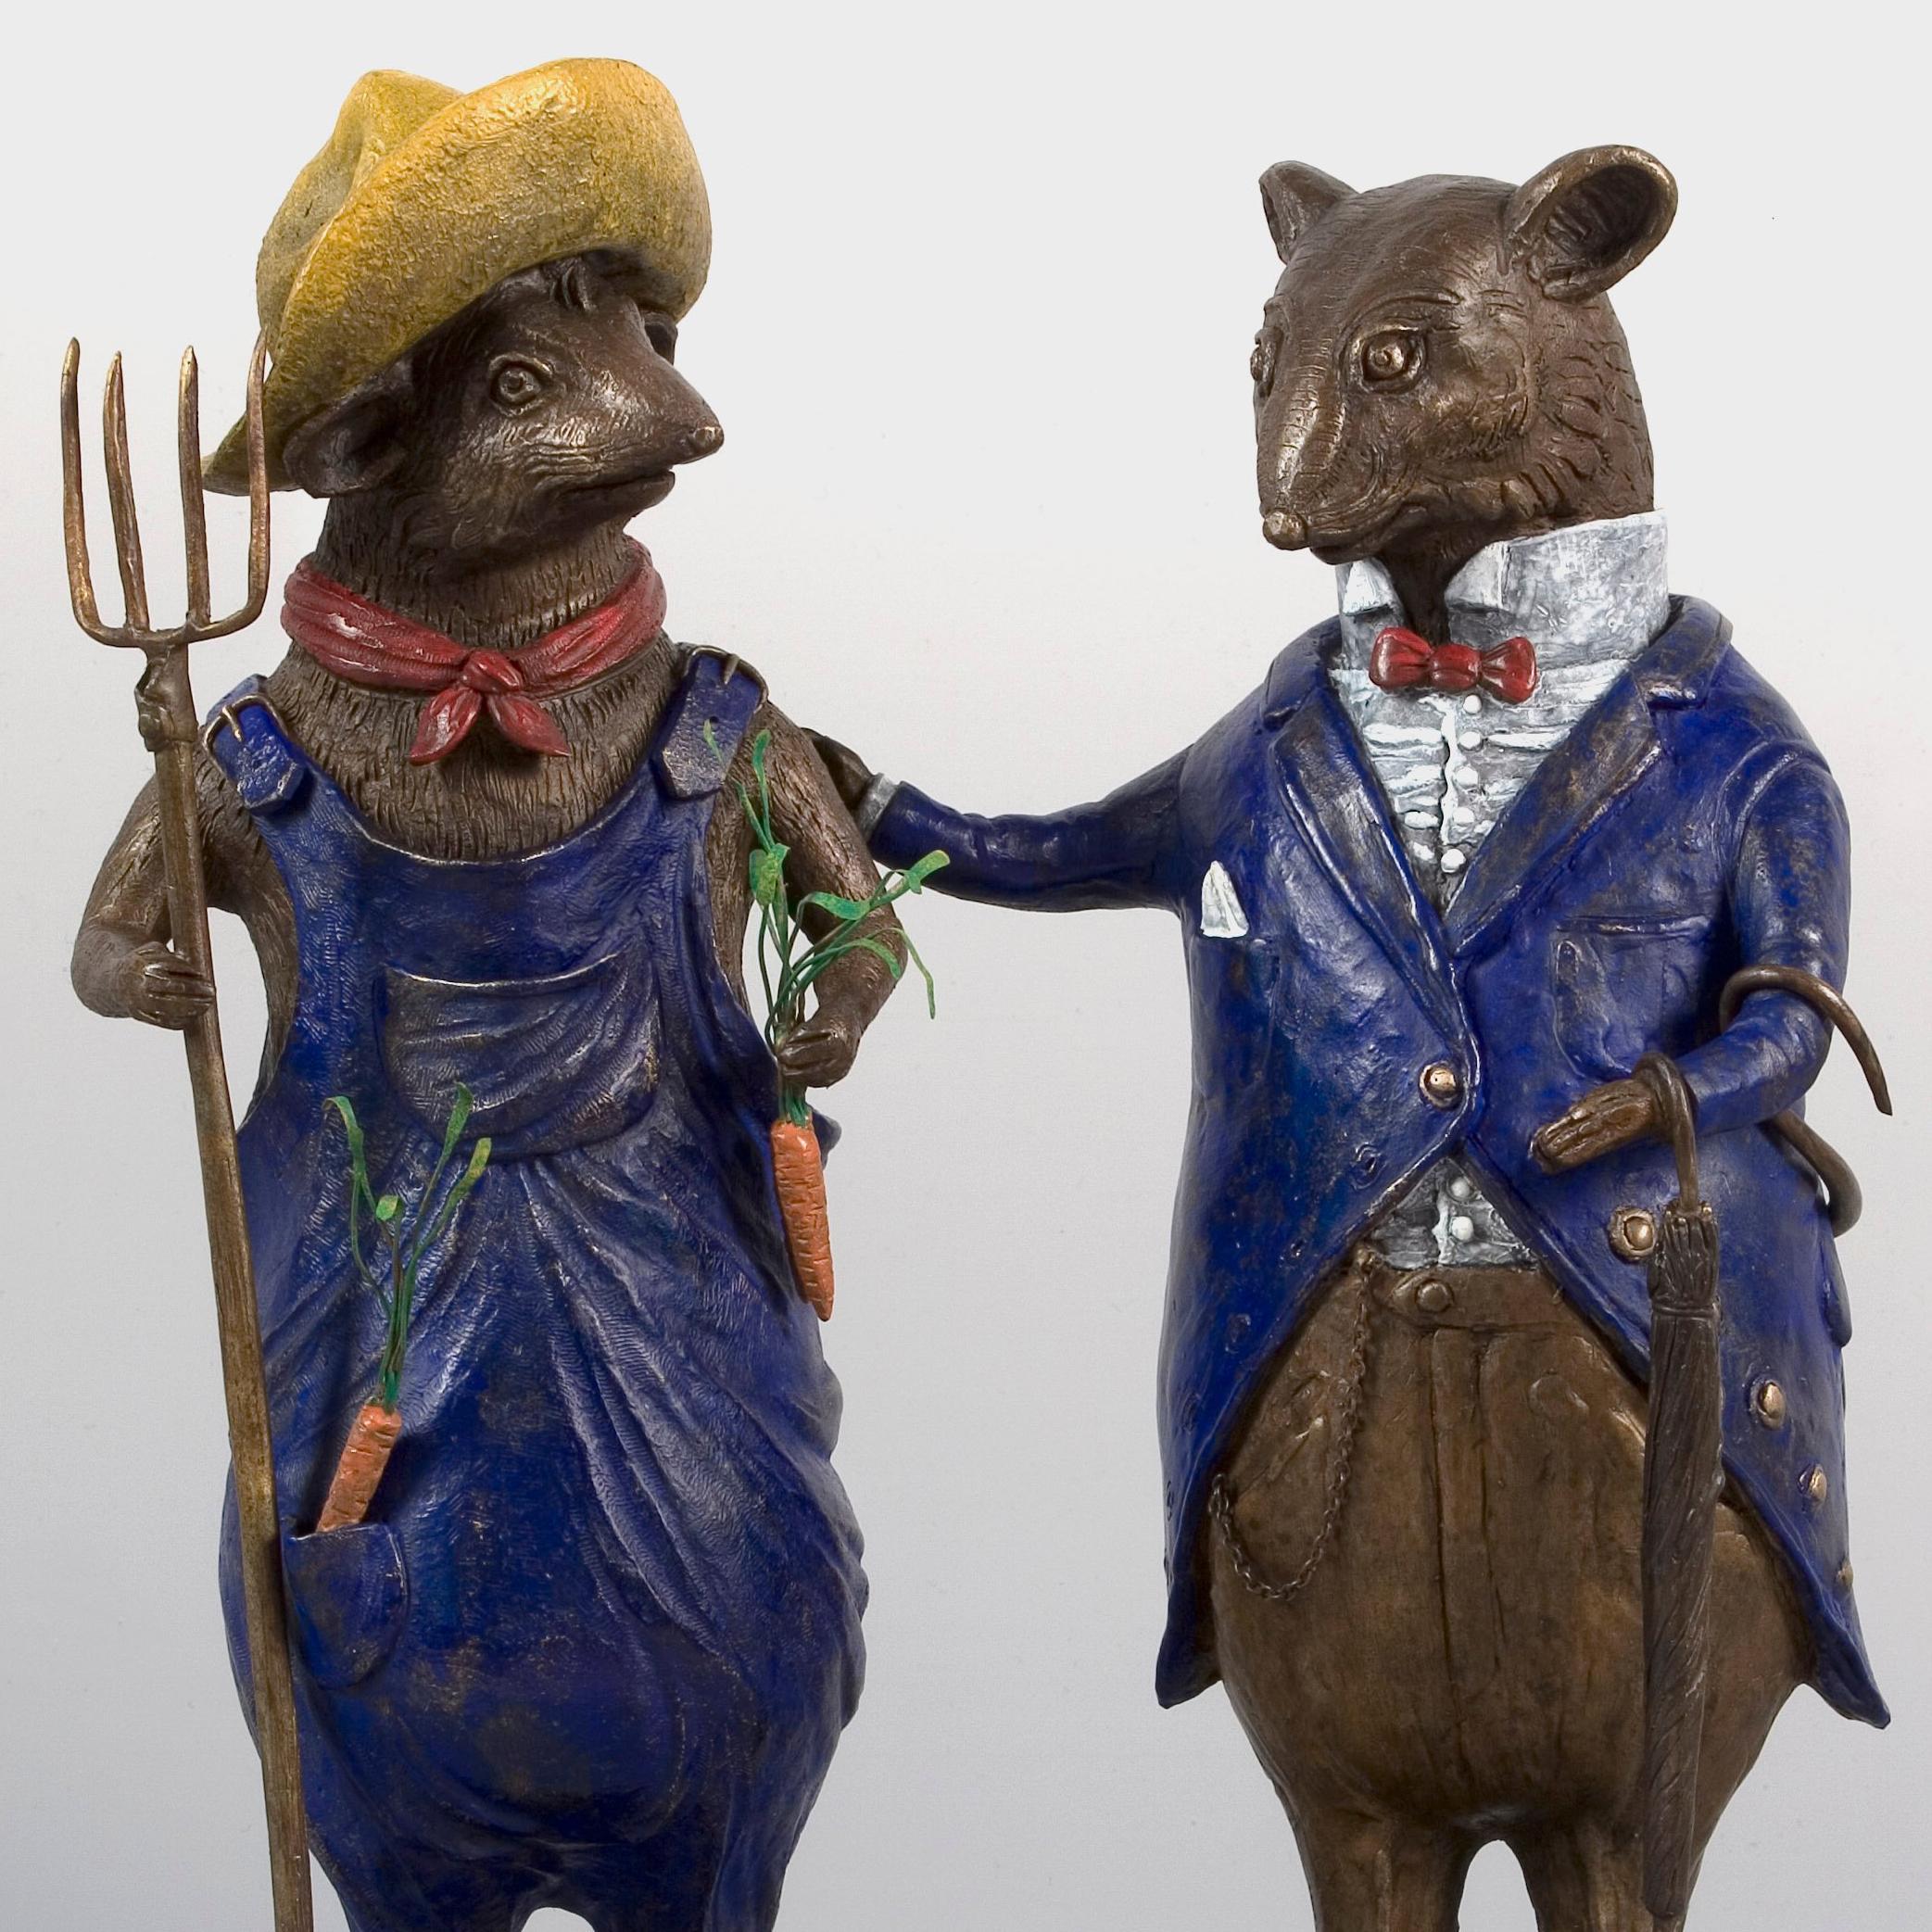 City Mouse and Country Mouse - Sculpture by Bjørn Okholm Skaarup